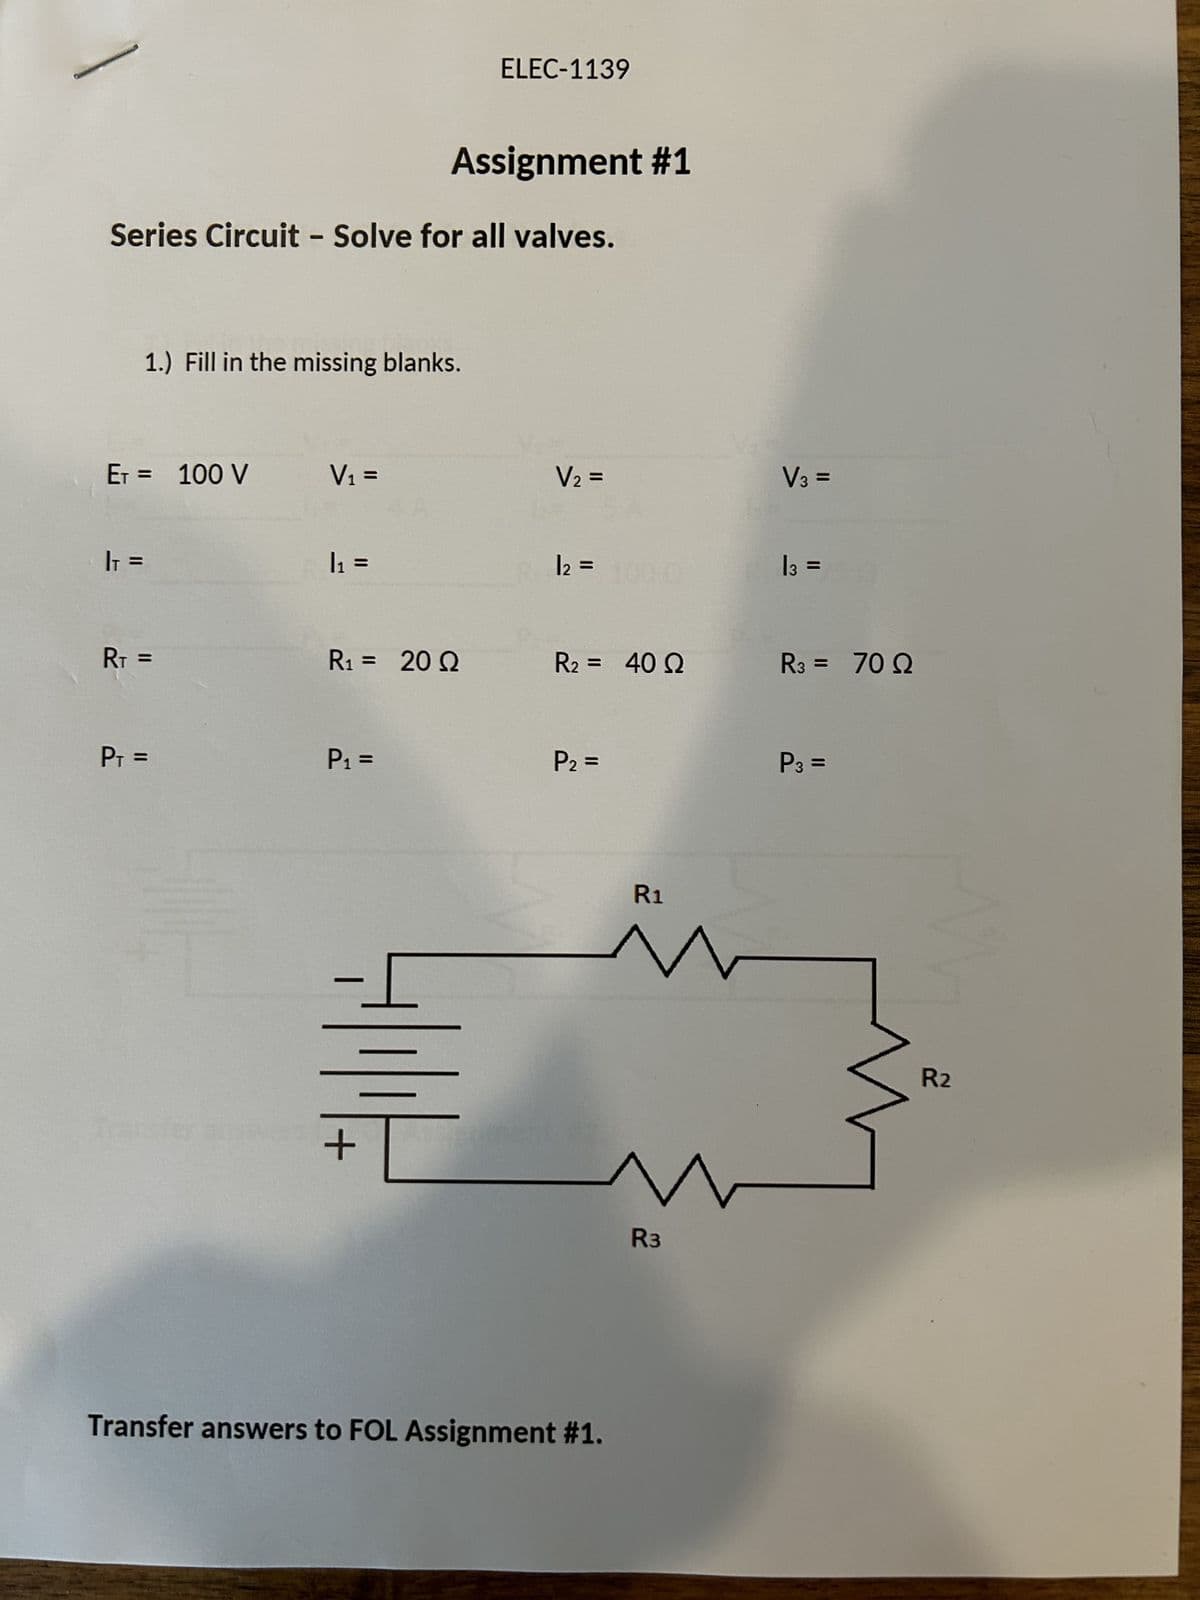 Series Circuit - Solve for all valves.
ET = 100 V
|₁ =
1.) Fill in the missing blanks.
RT =
P₁ =
V₁ =
|1 =
R₁ = 20 Q
P₁ =
Assignment #1
-I
ELEC-1139
+
V₂ =
12 = 1000
R₂ = 40 Q
P₂ =
Transfer answers to FOL Assignment #1.
R1
R3
V3 =
13 =
R3 = 70 Q
P3 =
R2